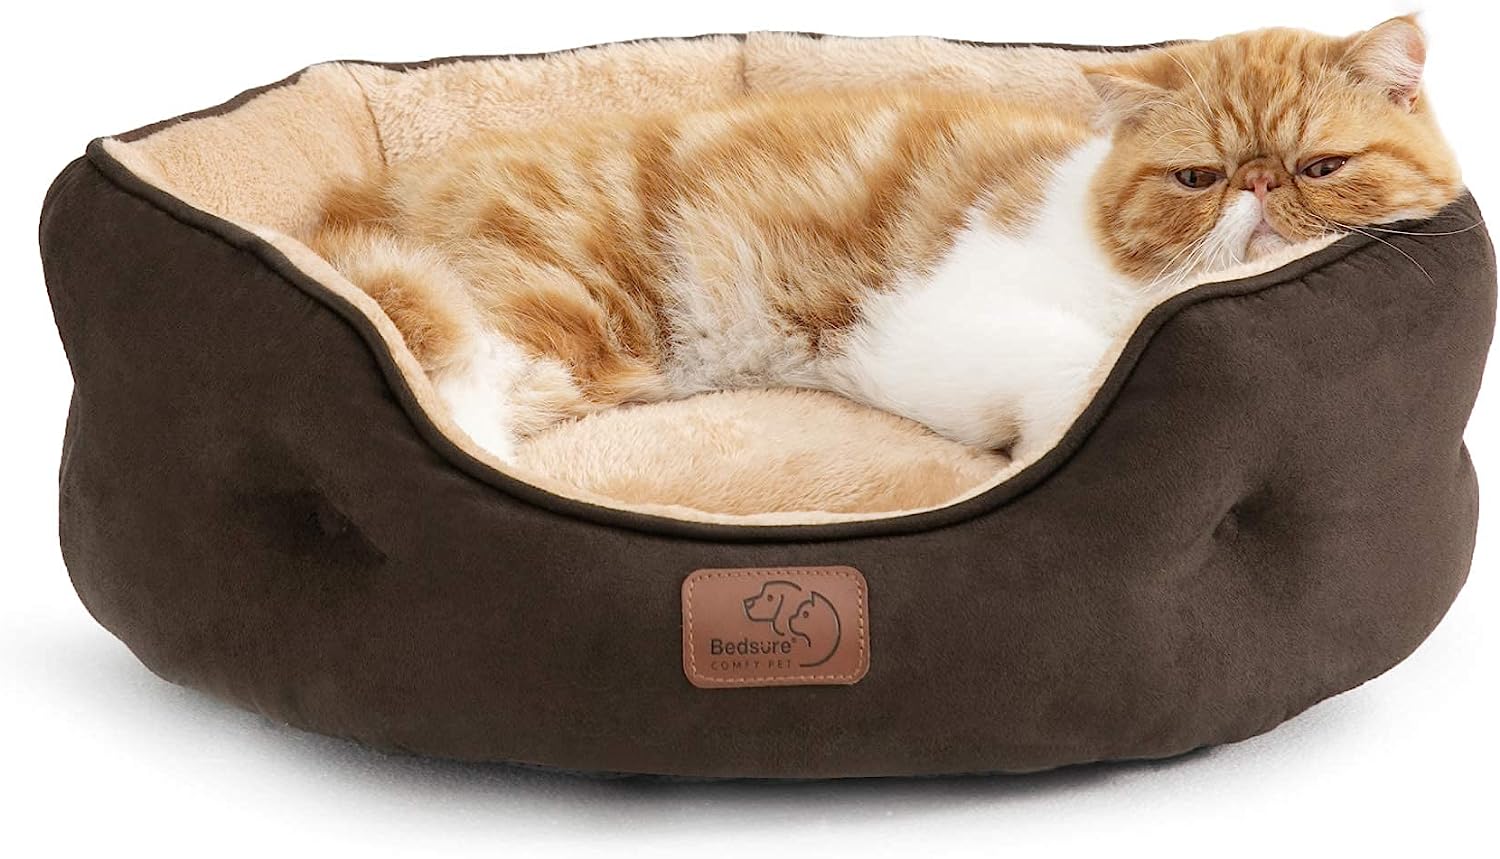 3. Bedsure Bed for Cats and Small Dogs